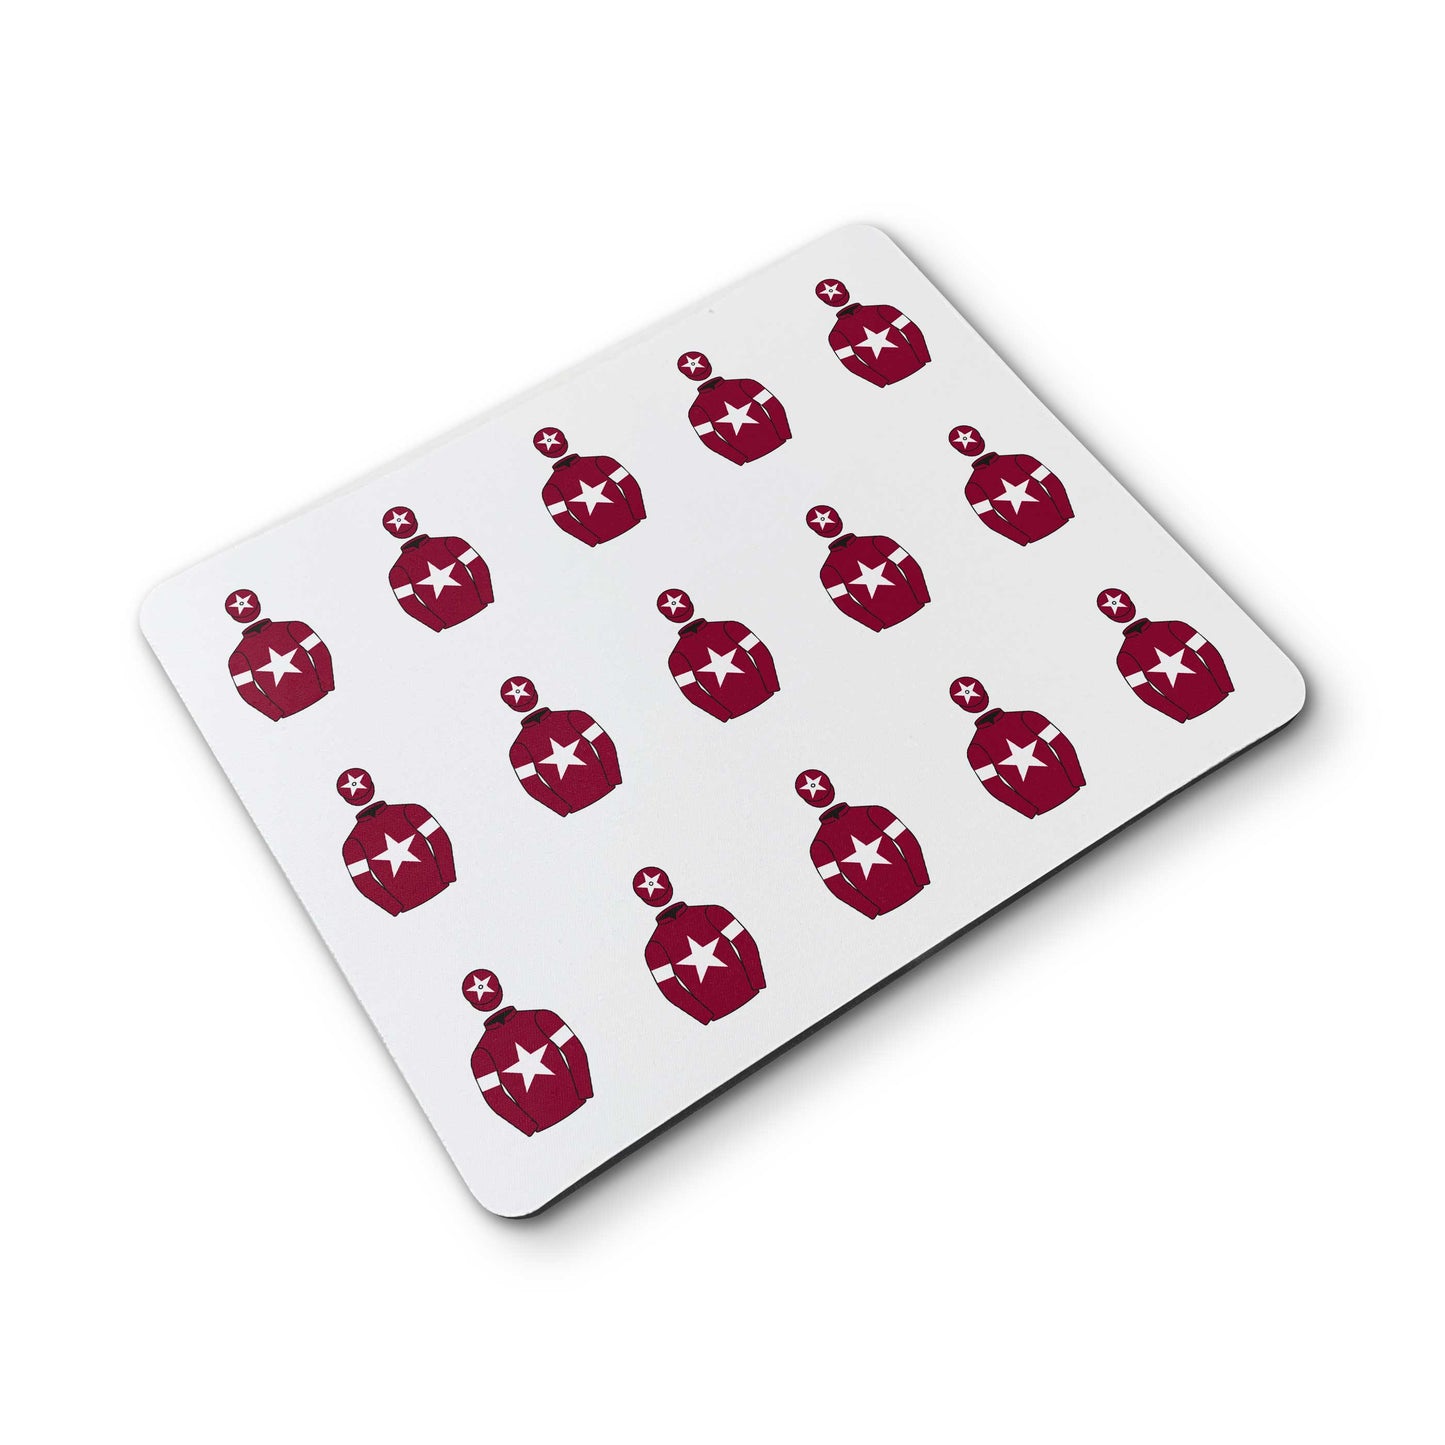 Gigginstown House Stud Mouse Mat - Mouse Mat - Hacked Up